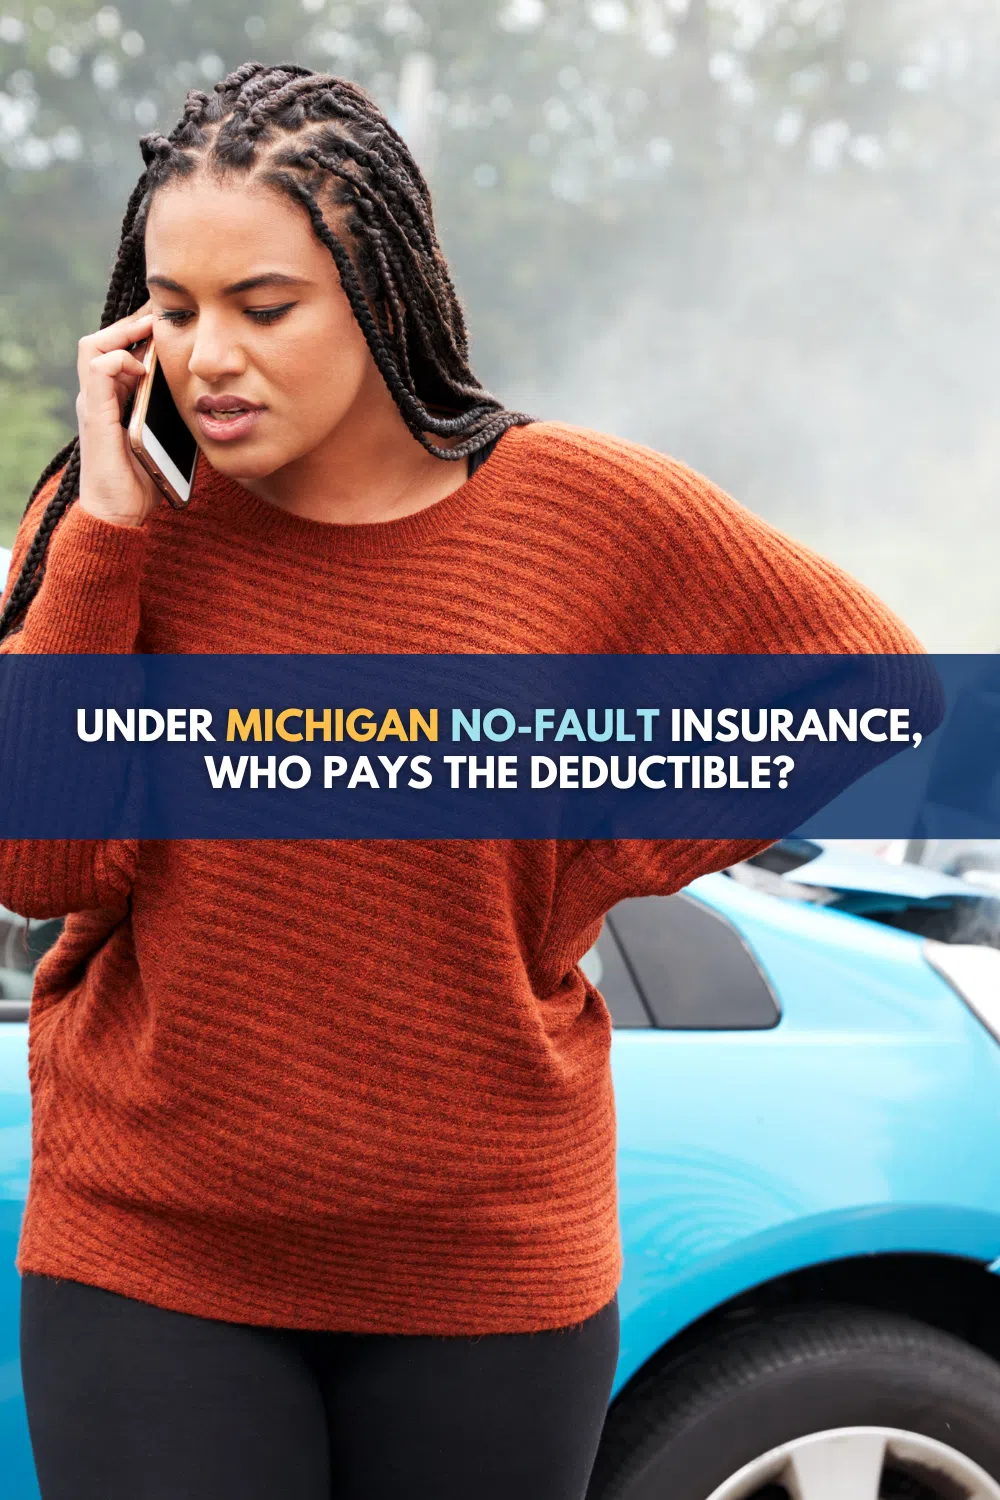 Under Michigan No-Fault insurance, who pays deductible?